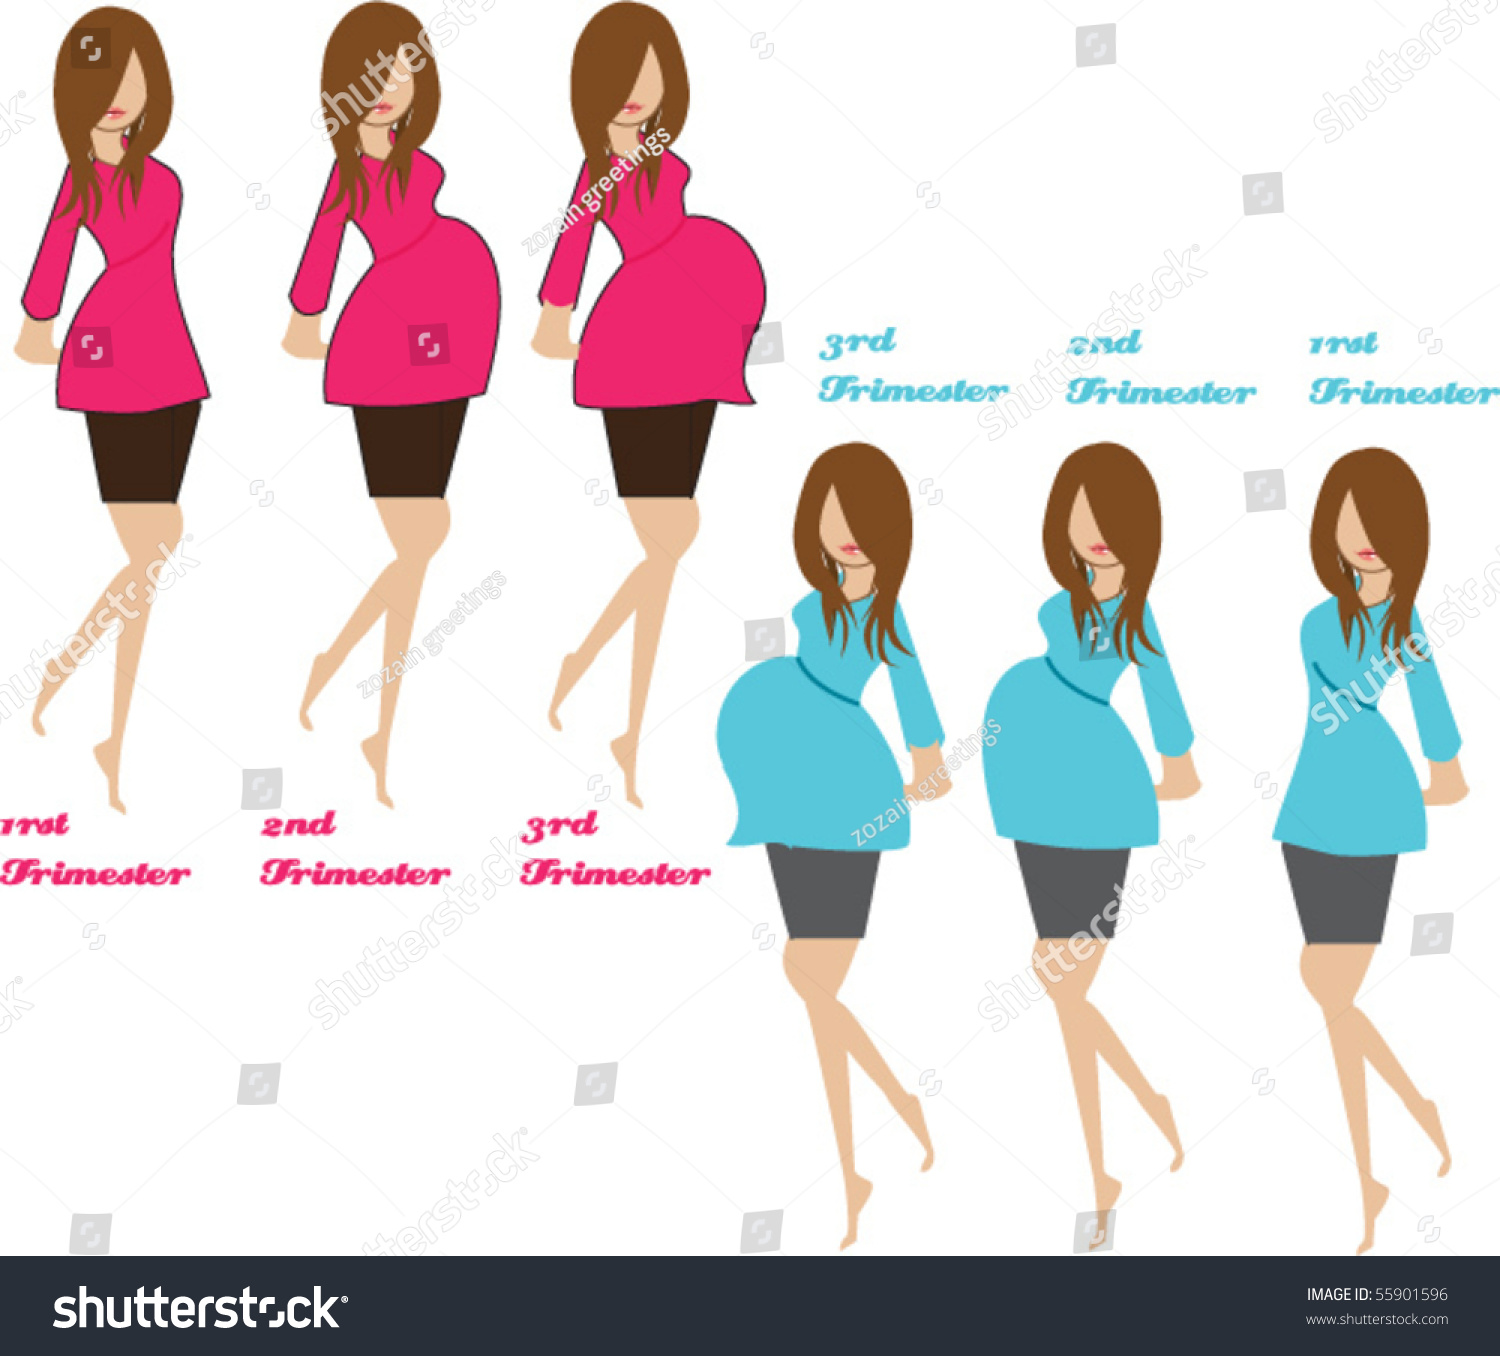 Pregnancy Stages Stock Vector Illustration 55901596 ...